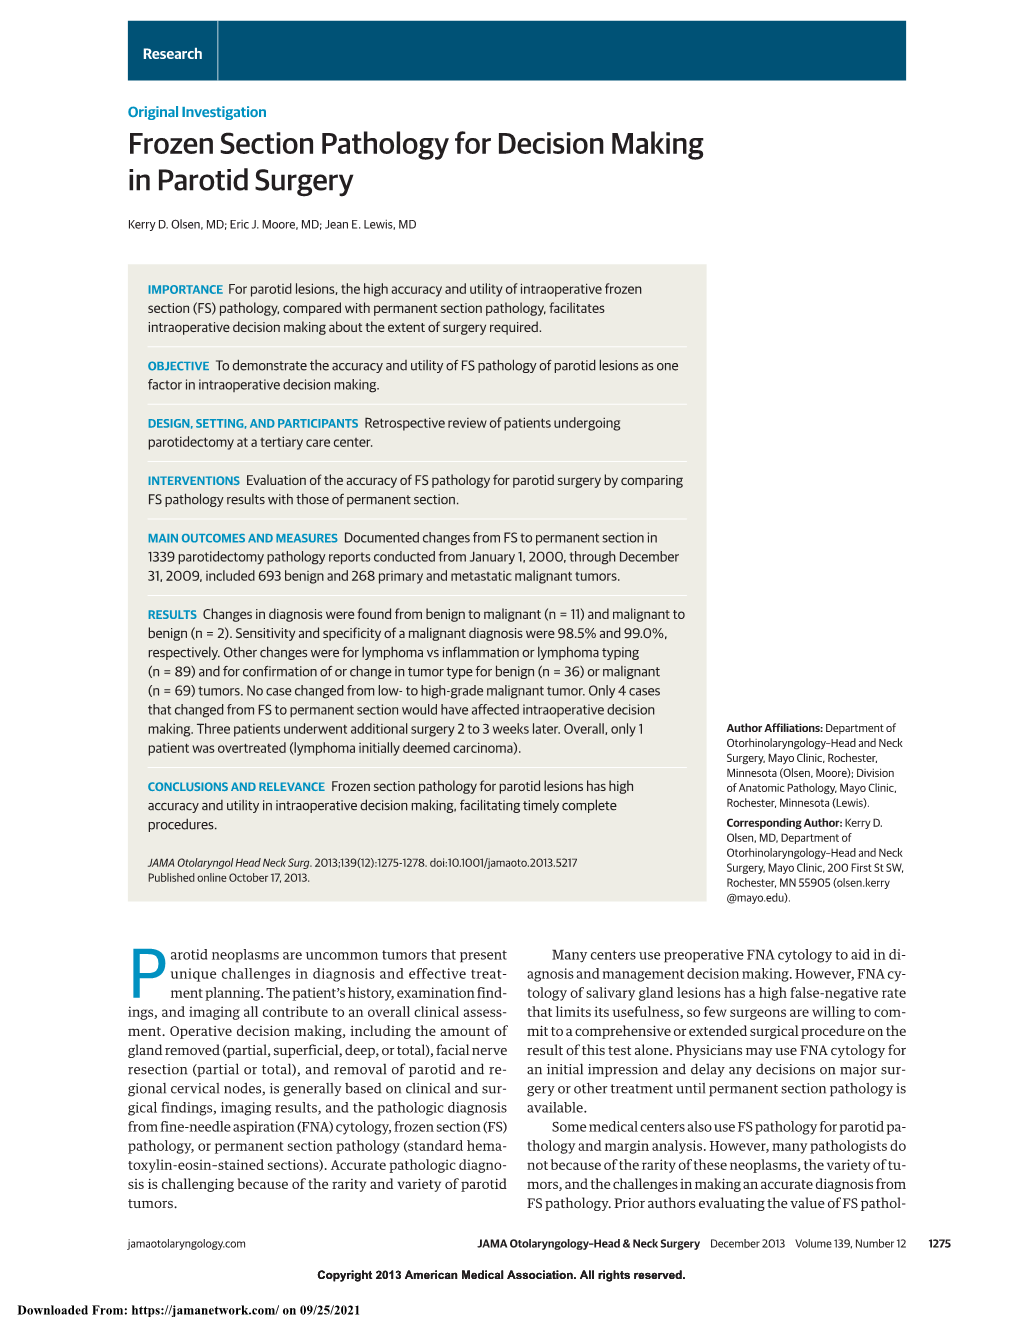 Frozen Section Pathology for Decision Making in Parotid Surgery